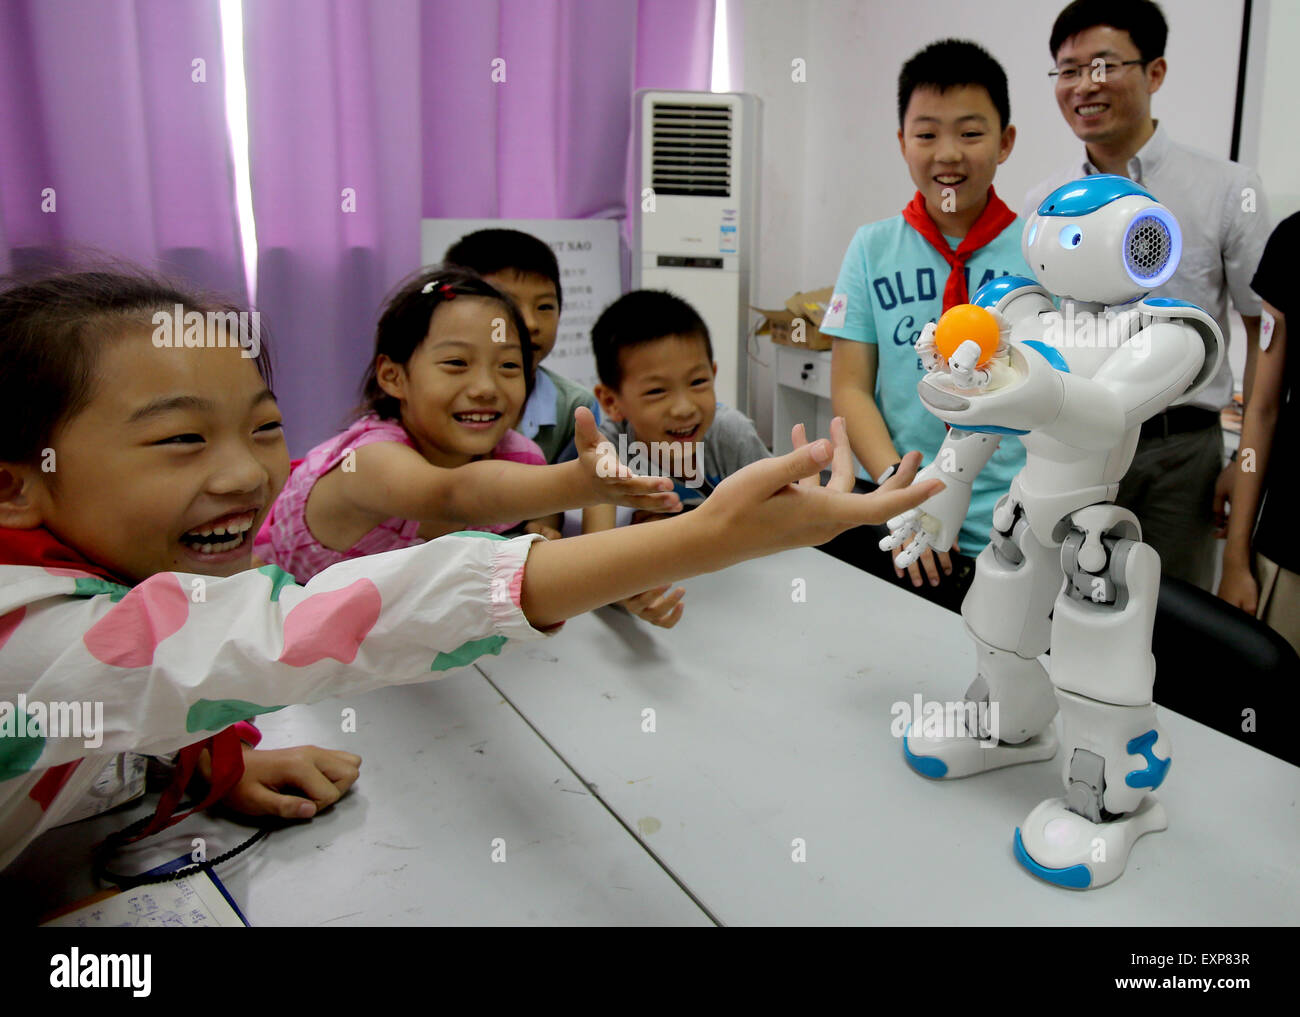 Shanghai, China. 16th July, 2015. Children interested in scientific invention meet Robot Nao at a robot laboratory in Shanghai Jiaotong University, east China, July 16, 2015. Nao is a 58-centimeter tall robot developed and manufactured by Aldebaran Robotics, a Paris-based company. Credit:  Liu Ying/Xinhua/Alamy Live News Stock Photo